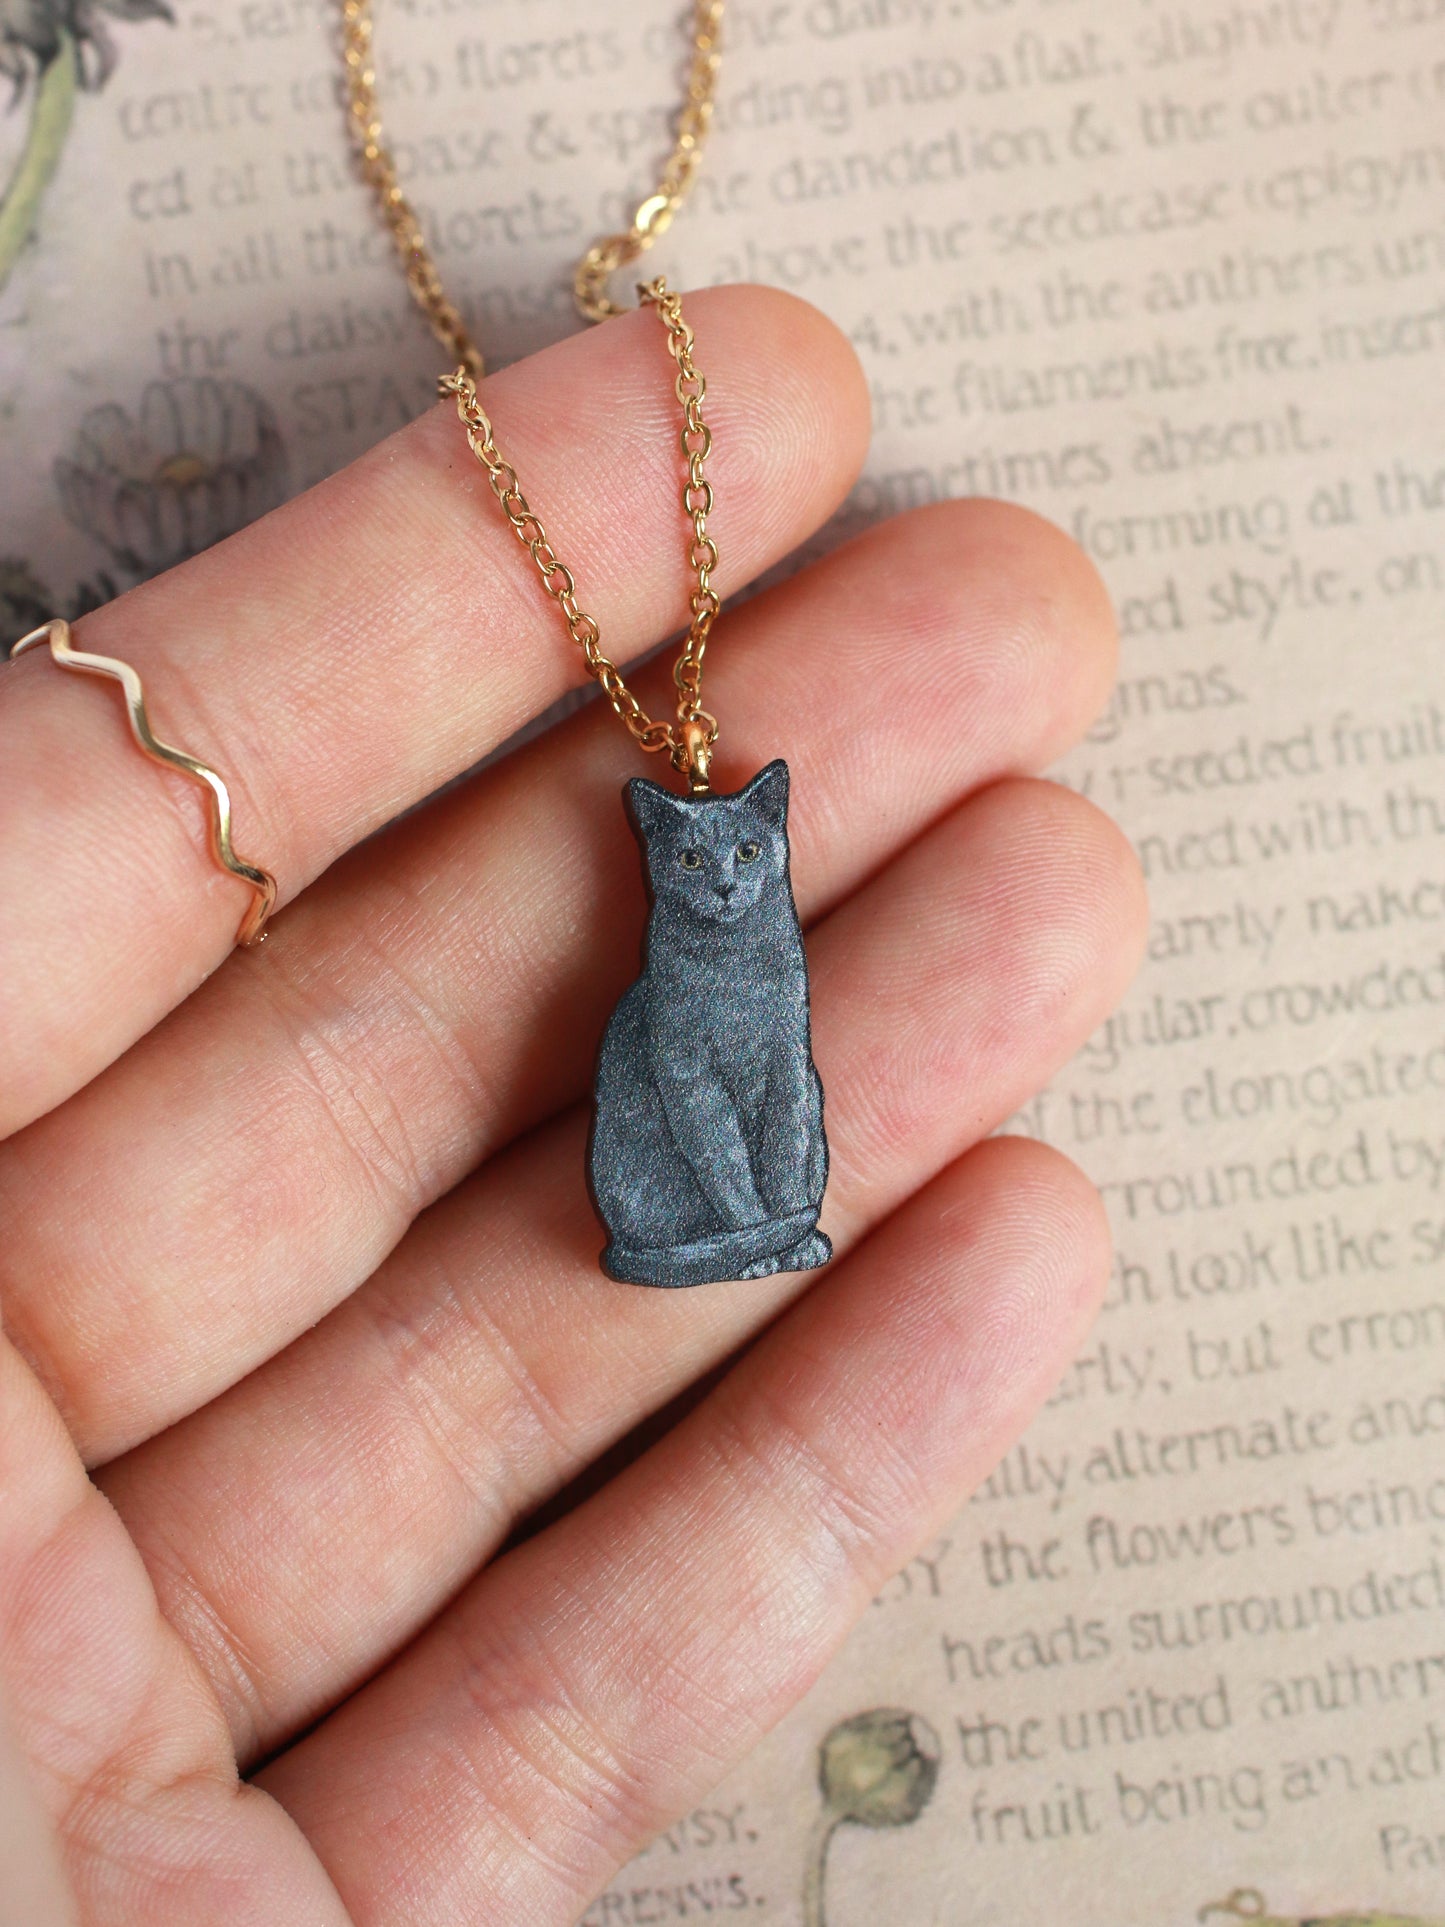 Gray cat necklace